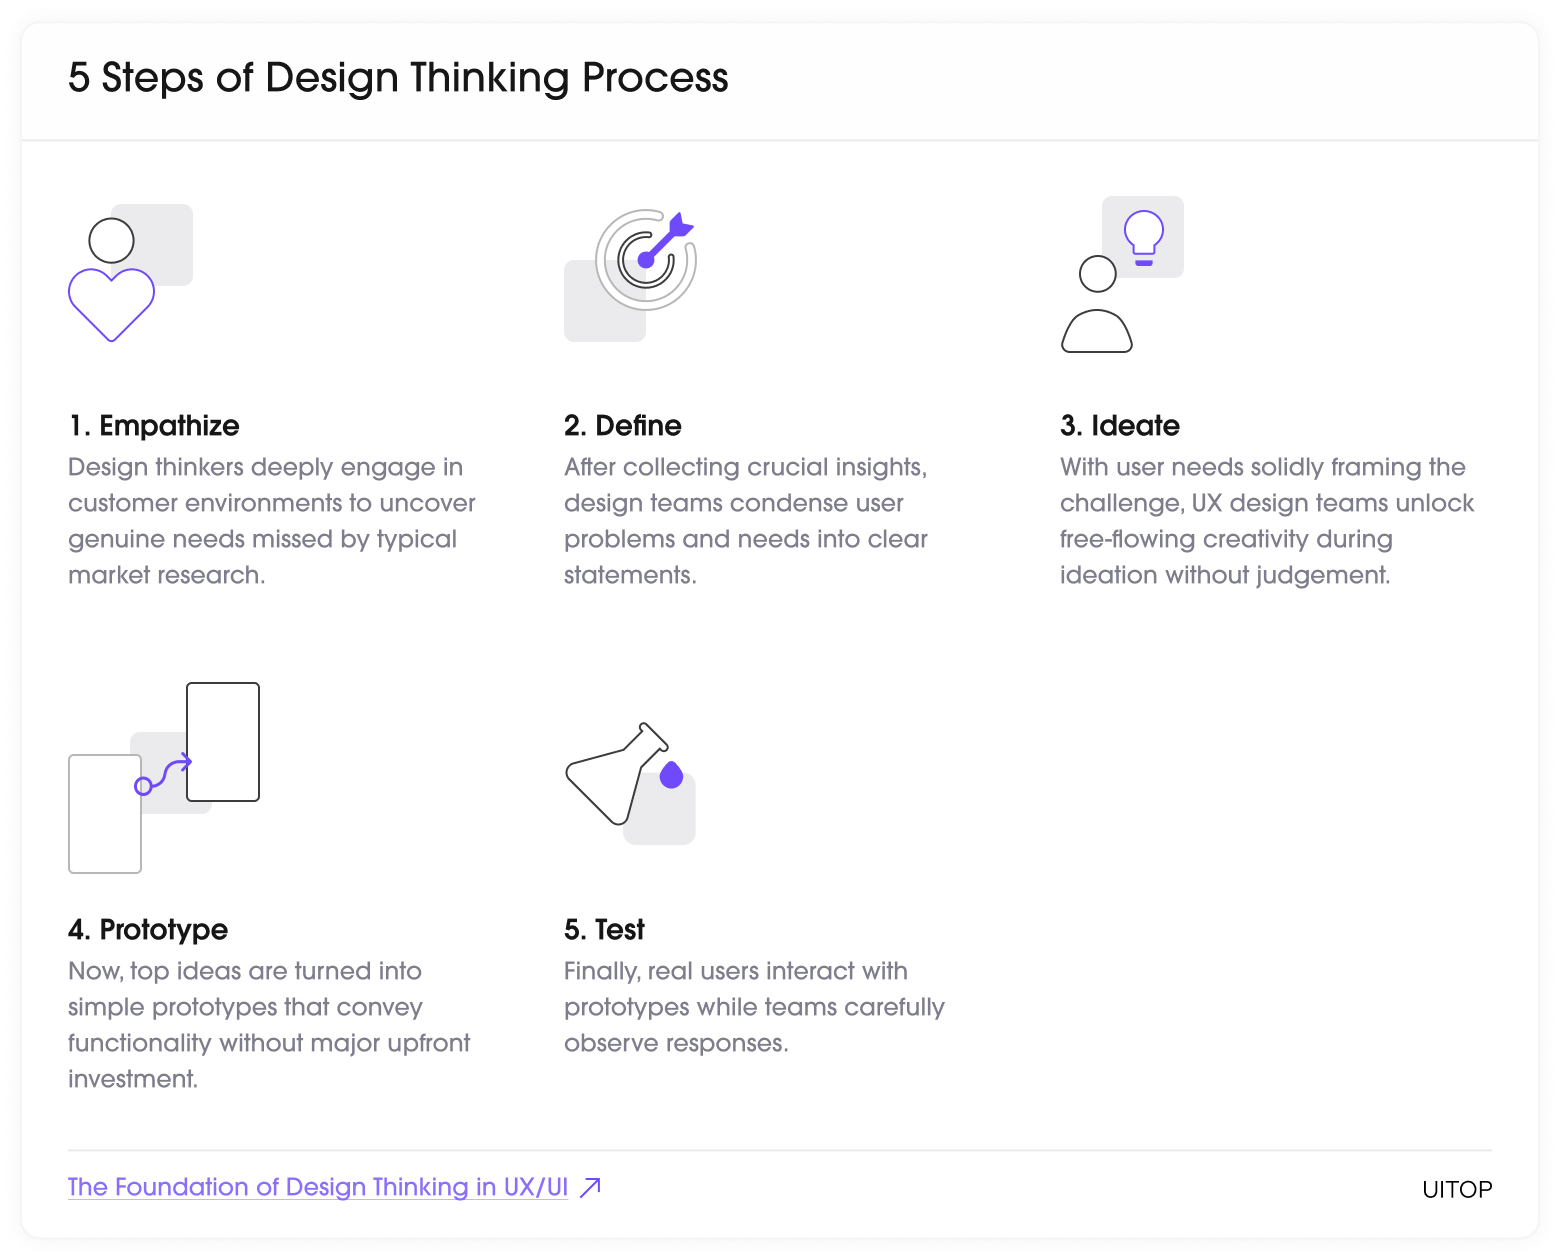 5 steps of design thinking process